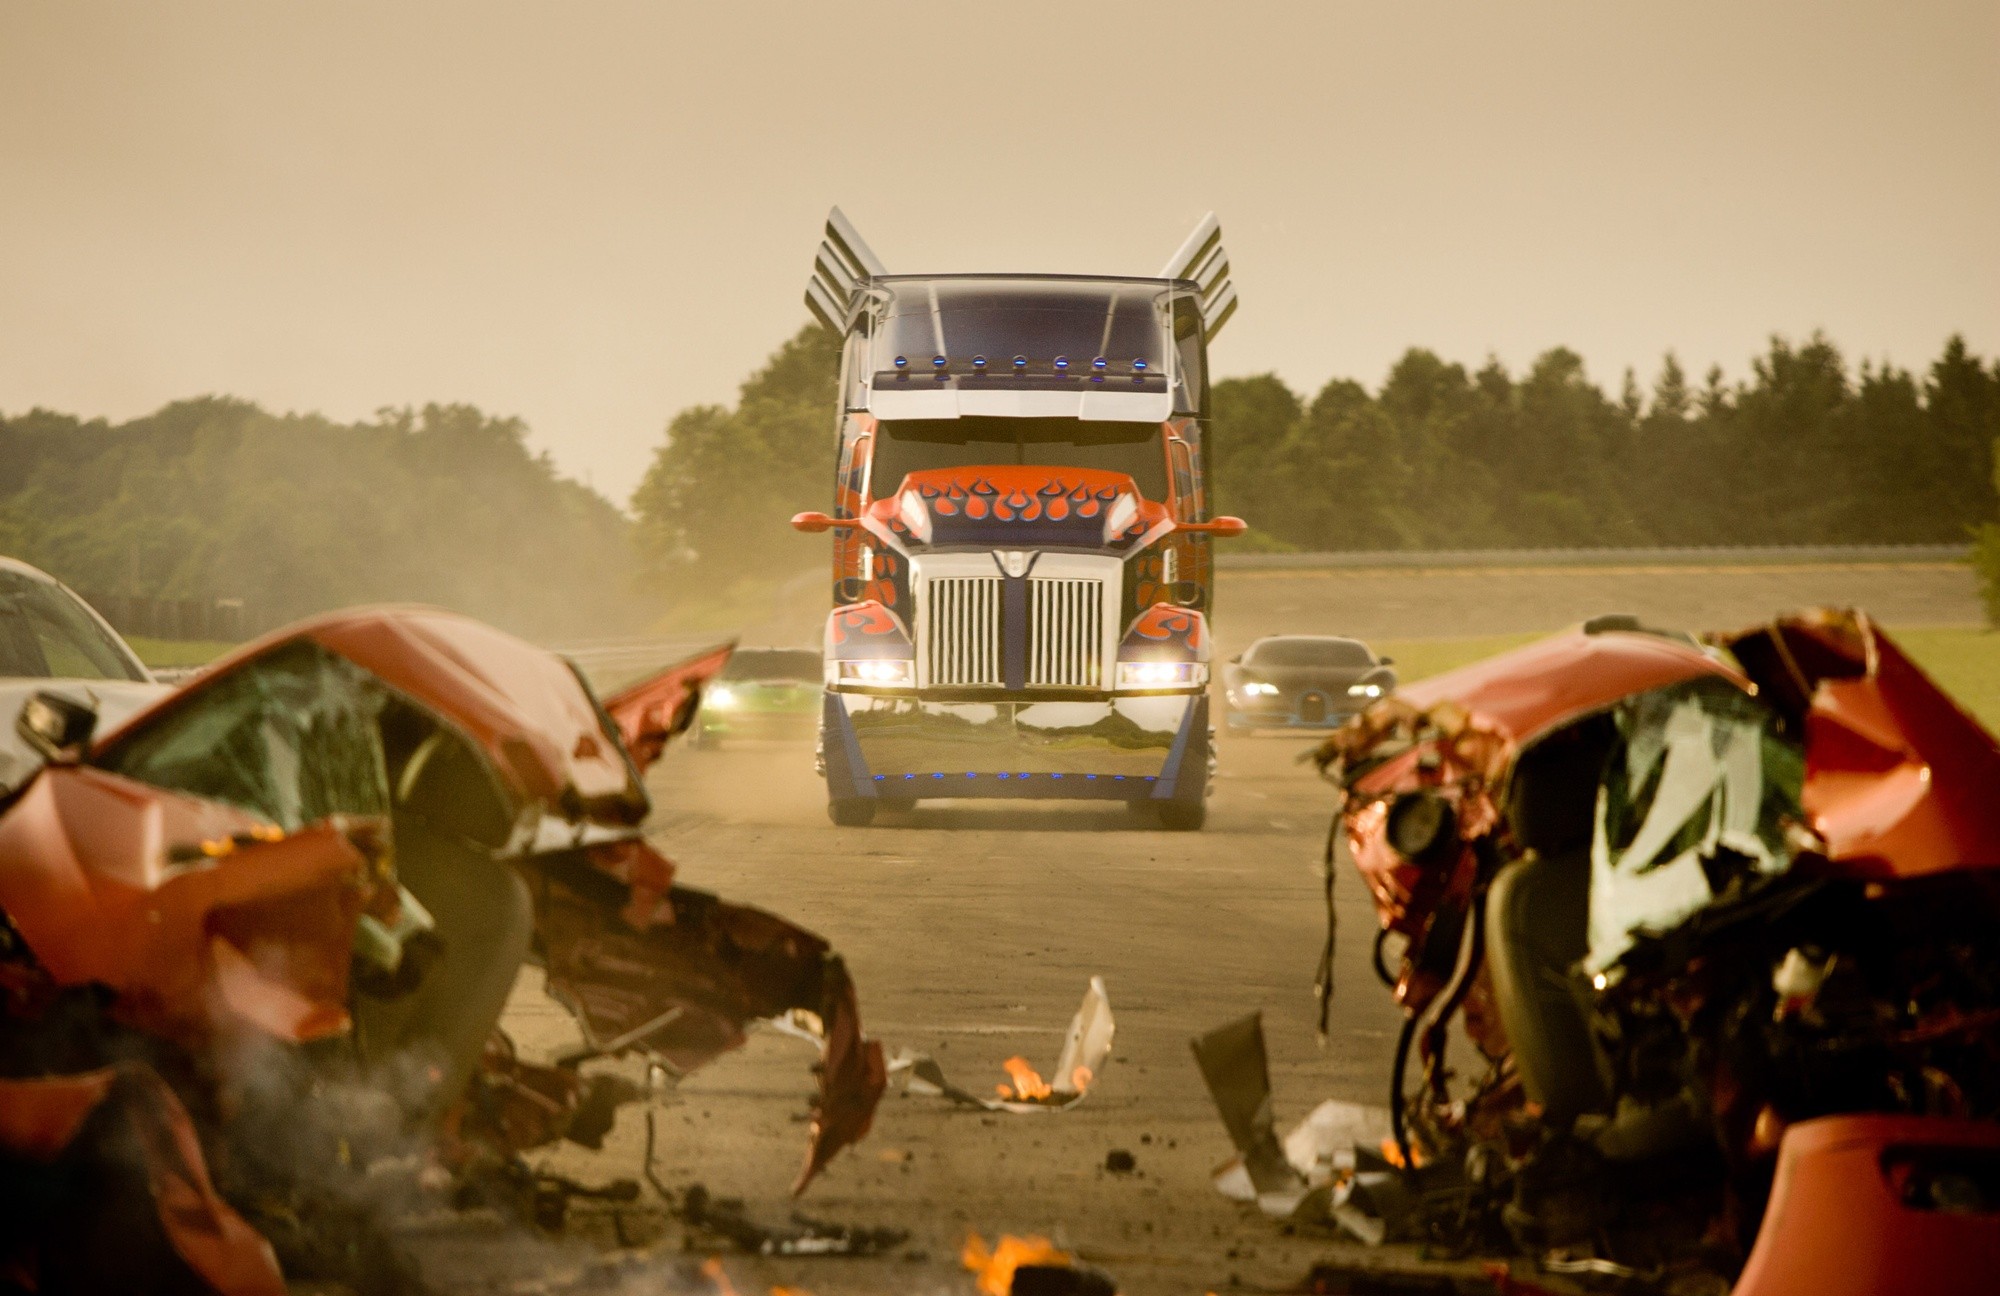 A scene from Paramount Pictures' Transformers: Age of Extinction (2014)